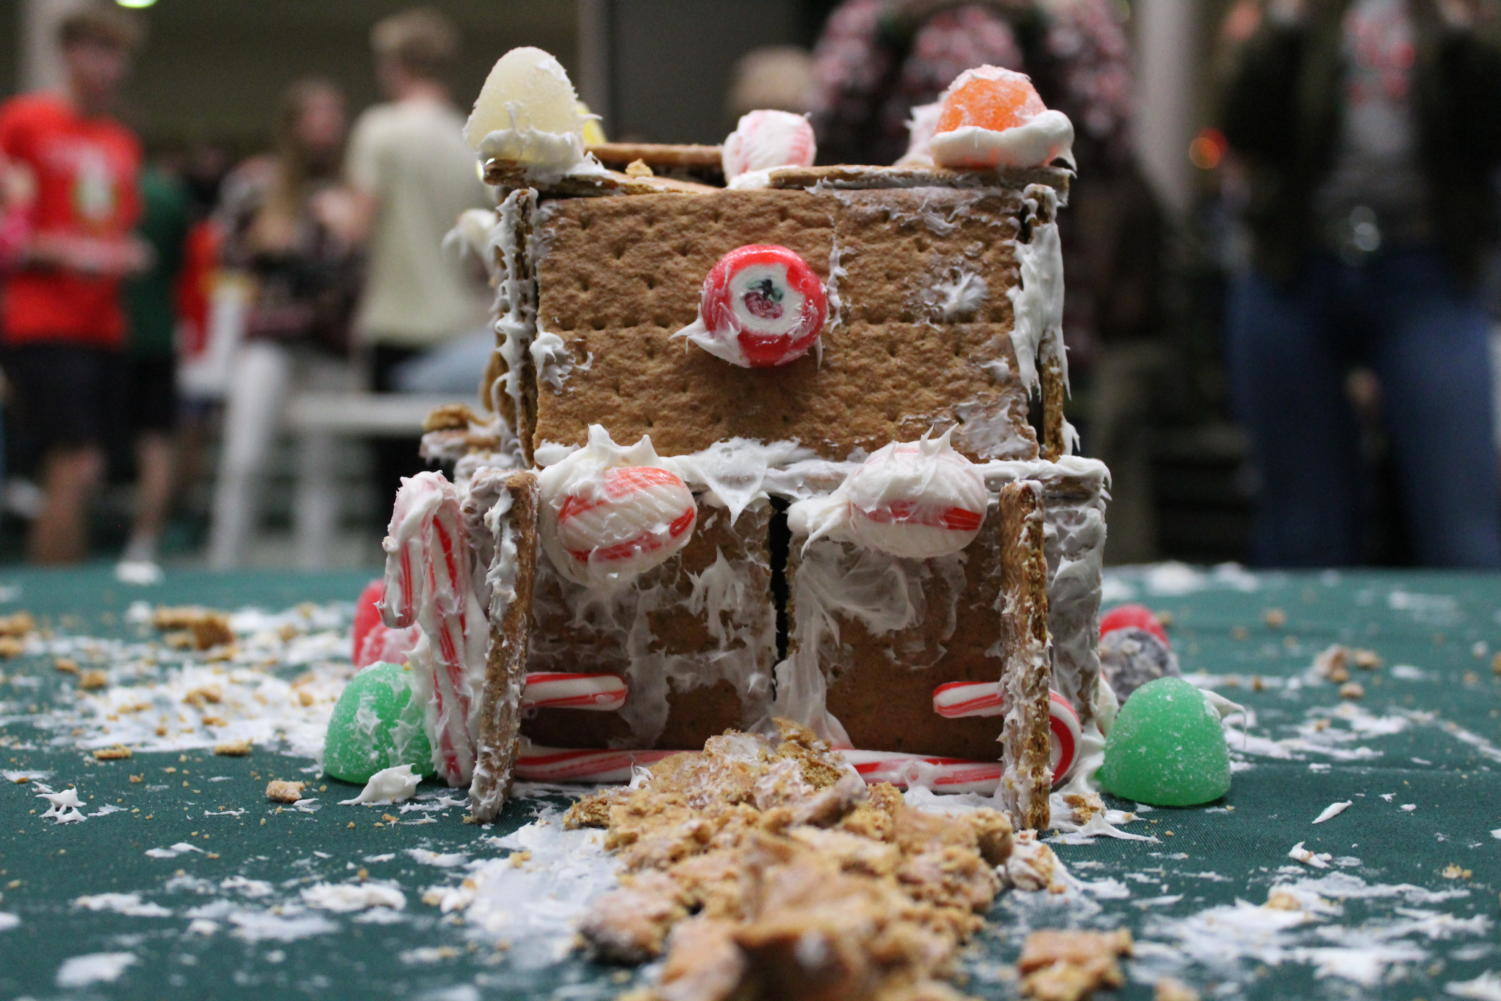 Gallery+of+the+day%3A+Gingerbread+House+and+Candy+Cane+Challenge